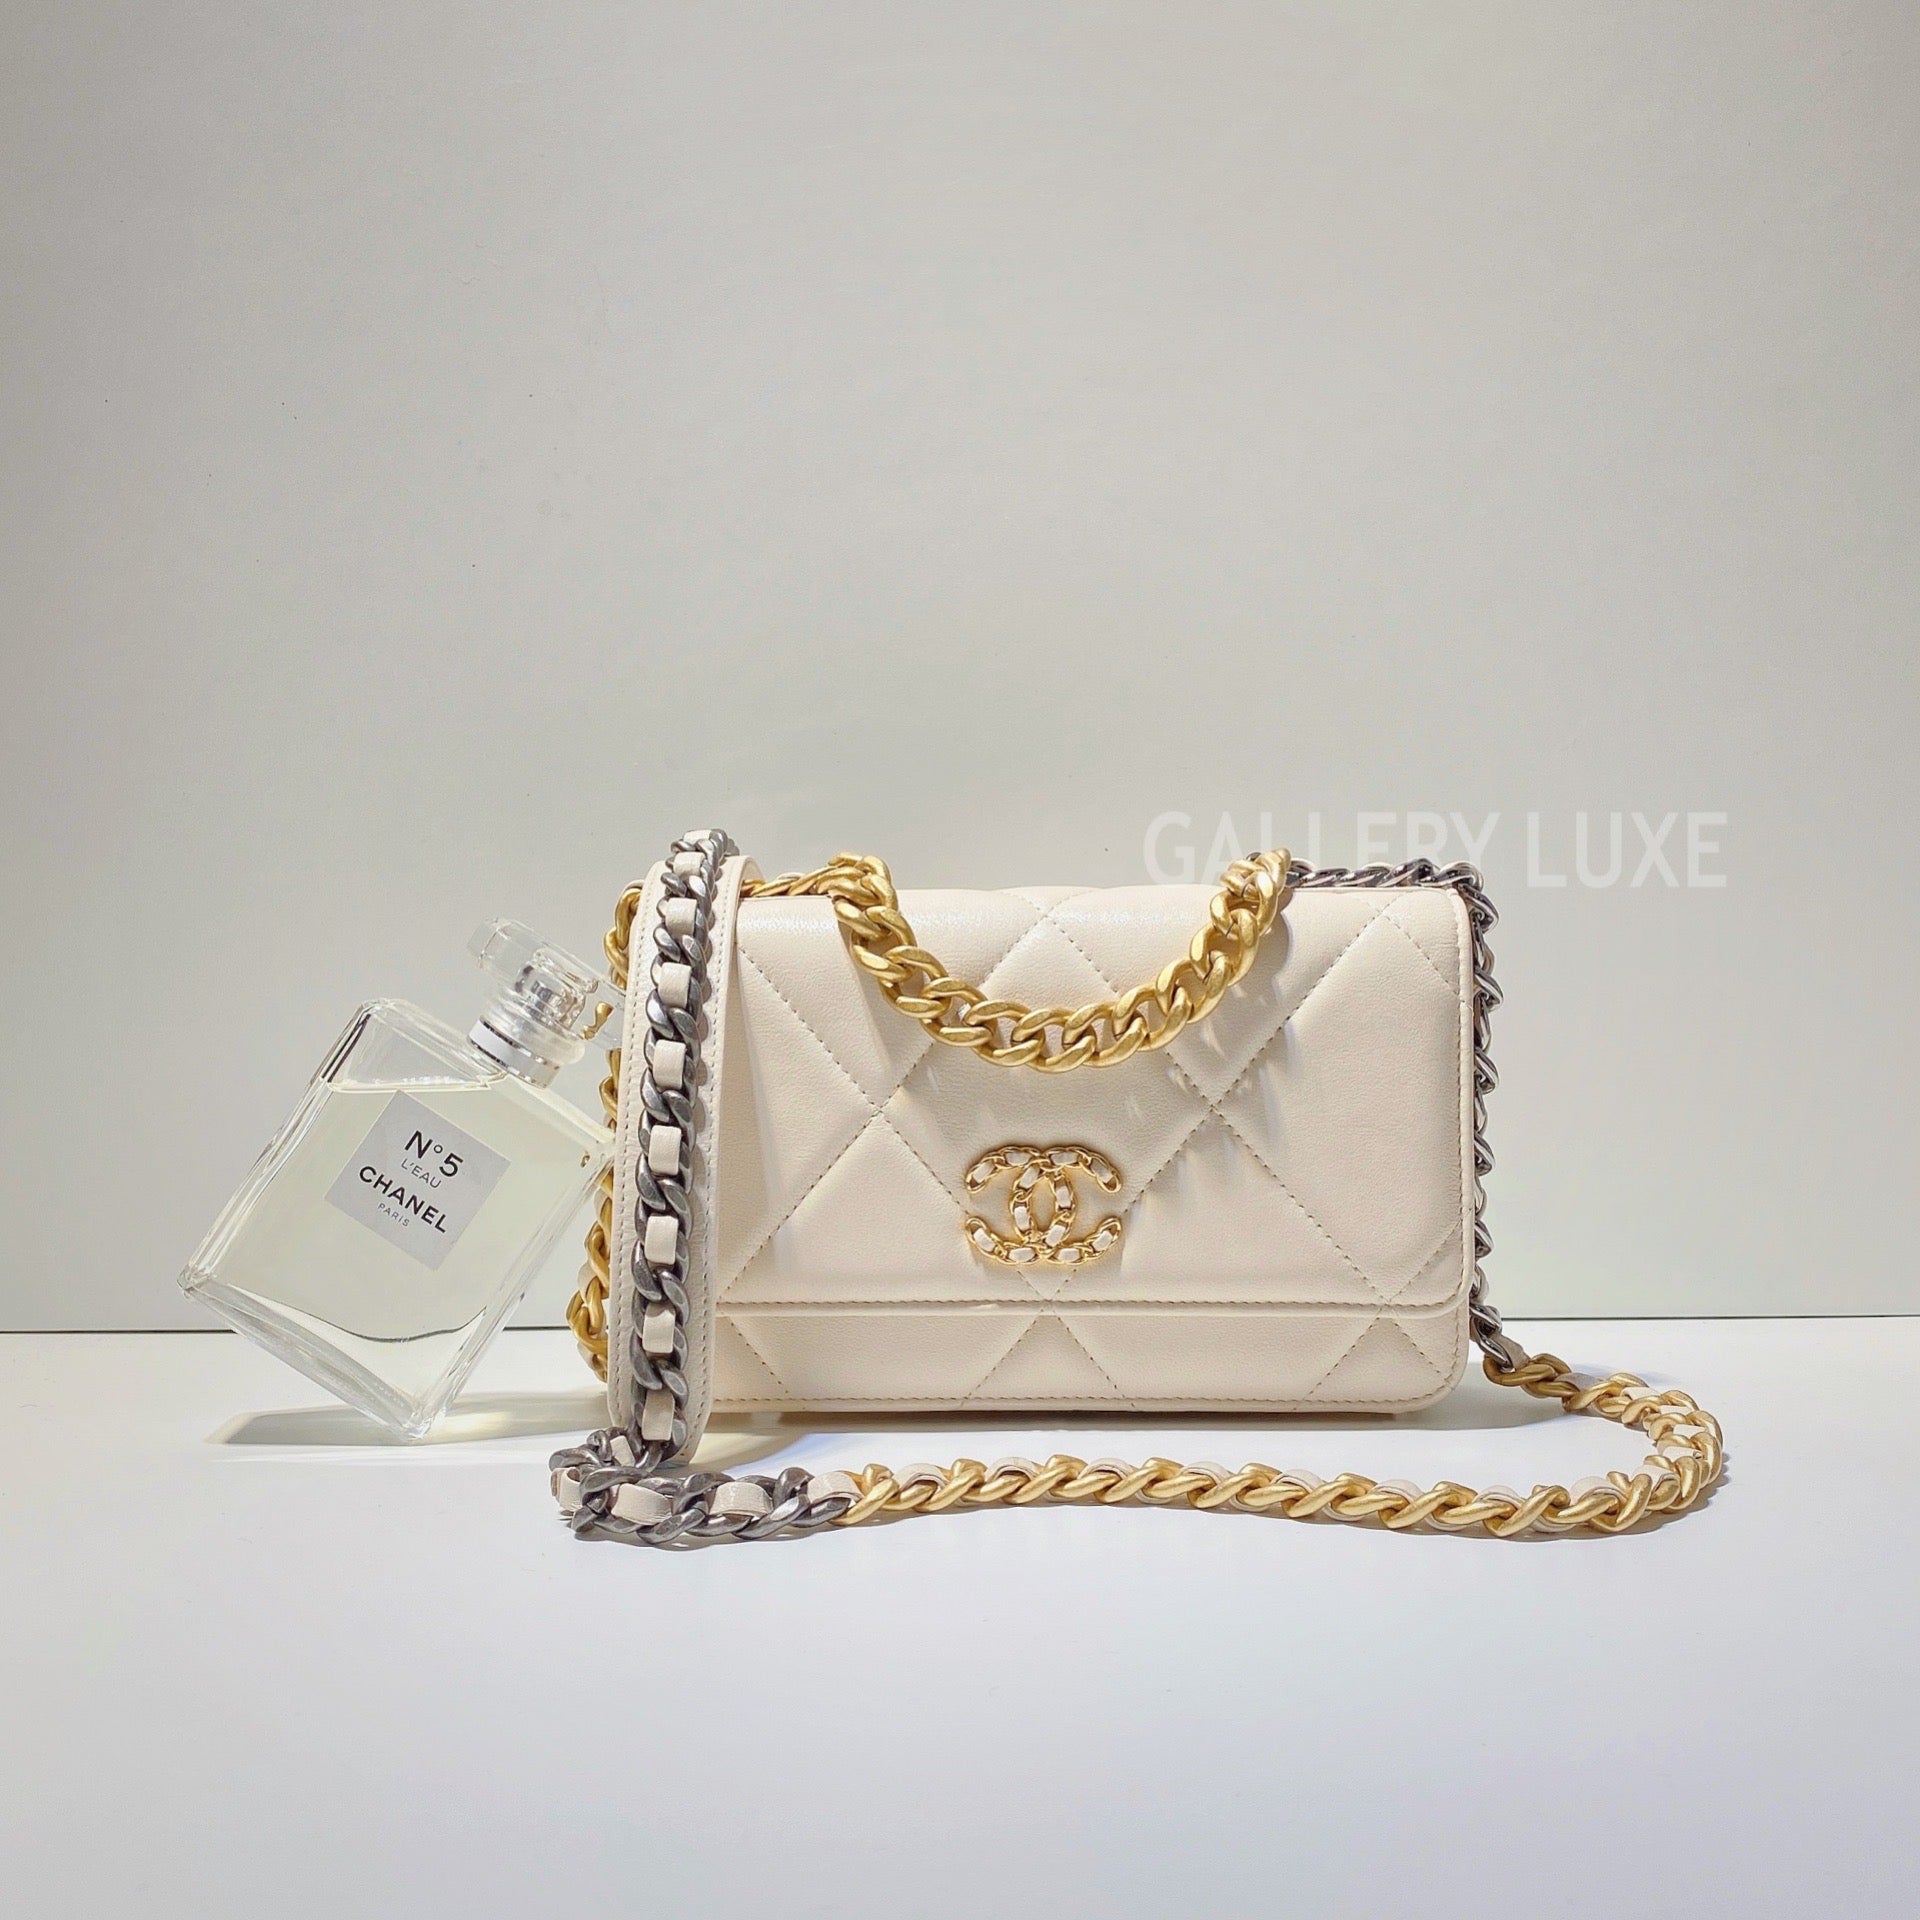 No.2914-Chanel 19 Wallet On Chain – Gallery Luxe